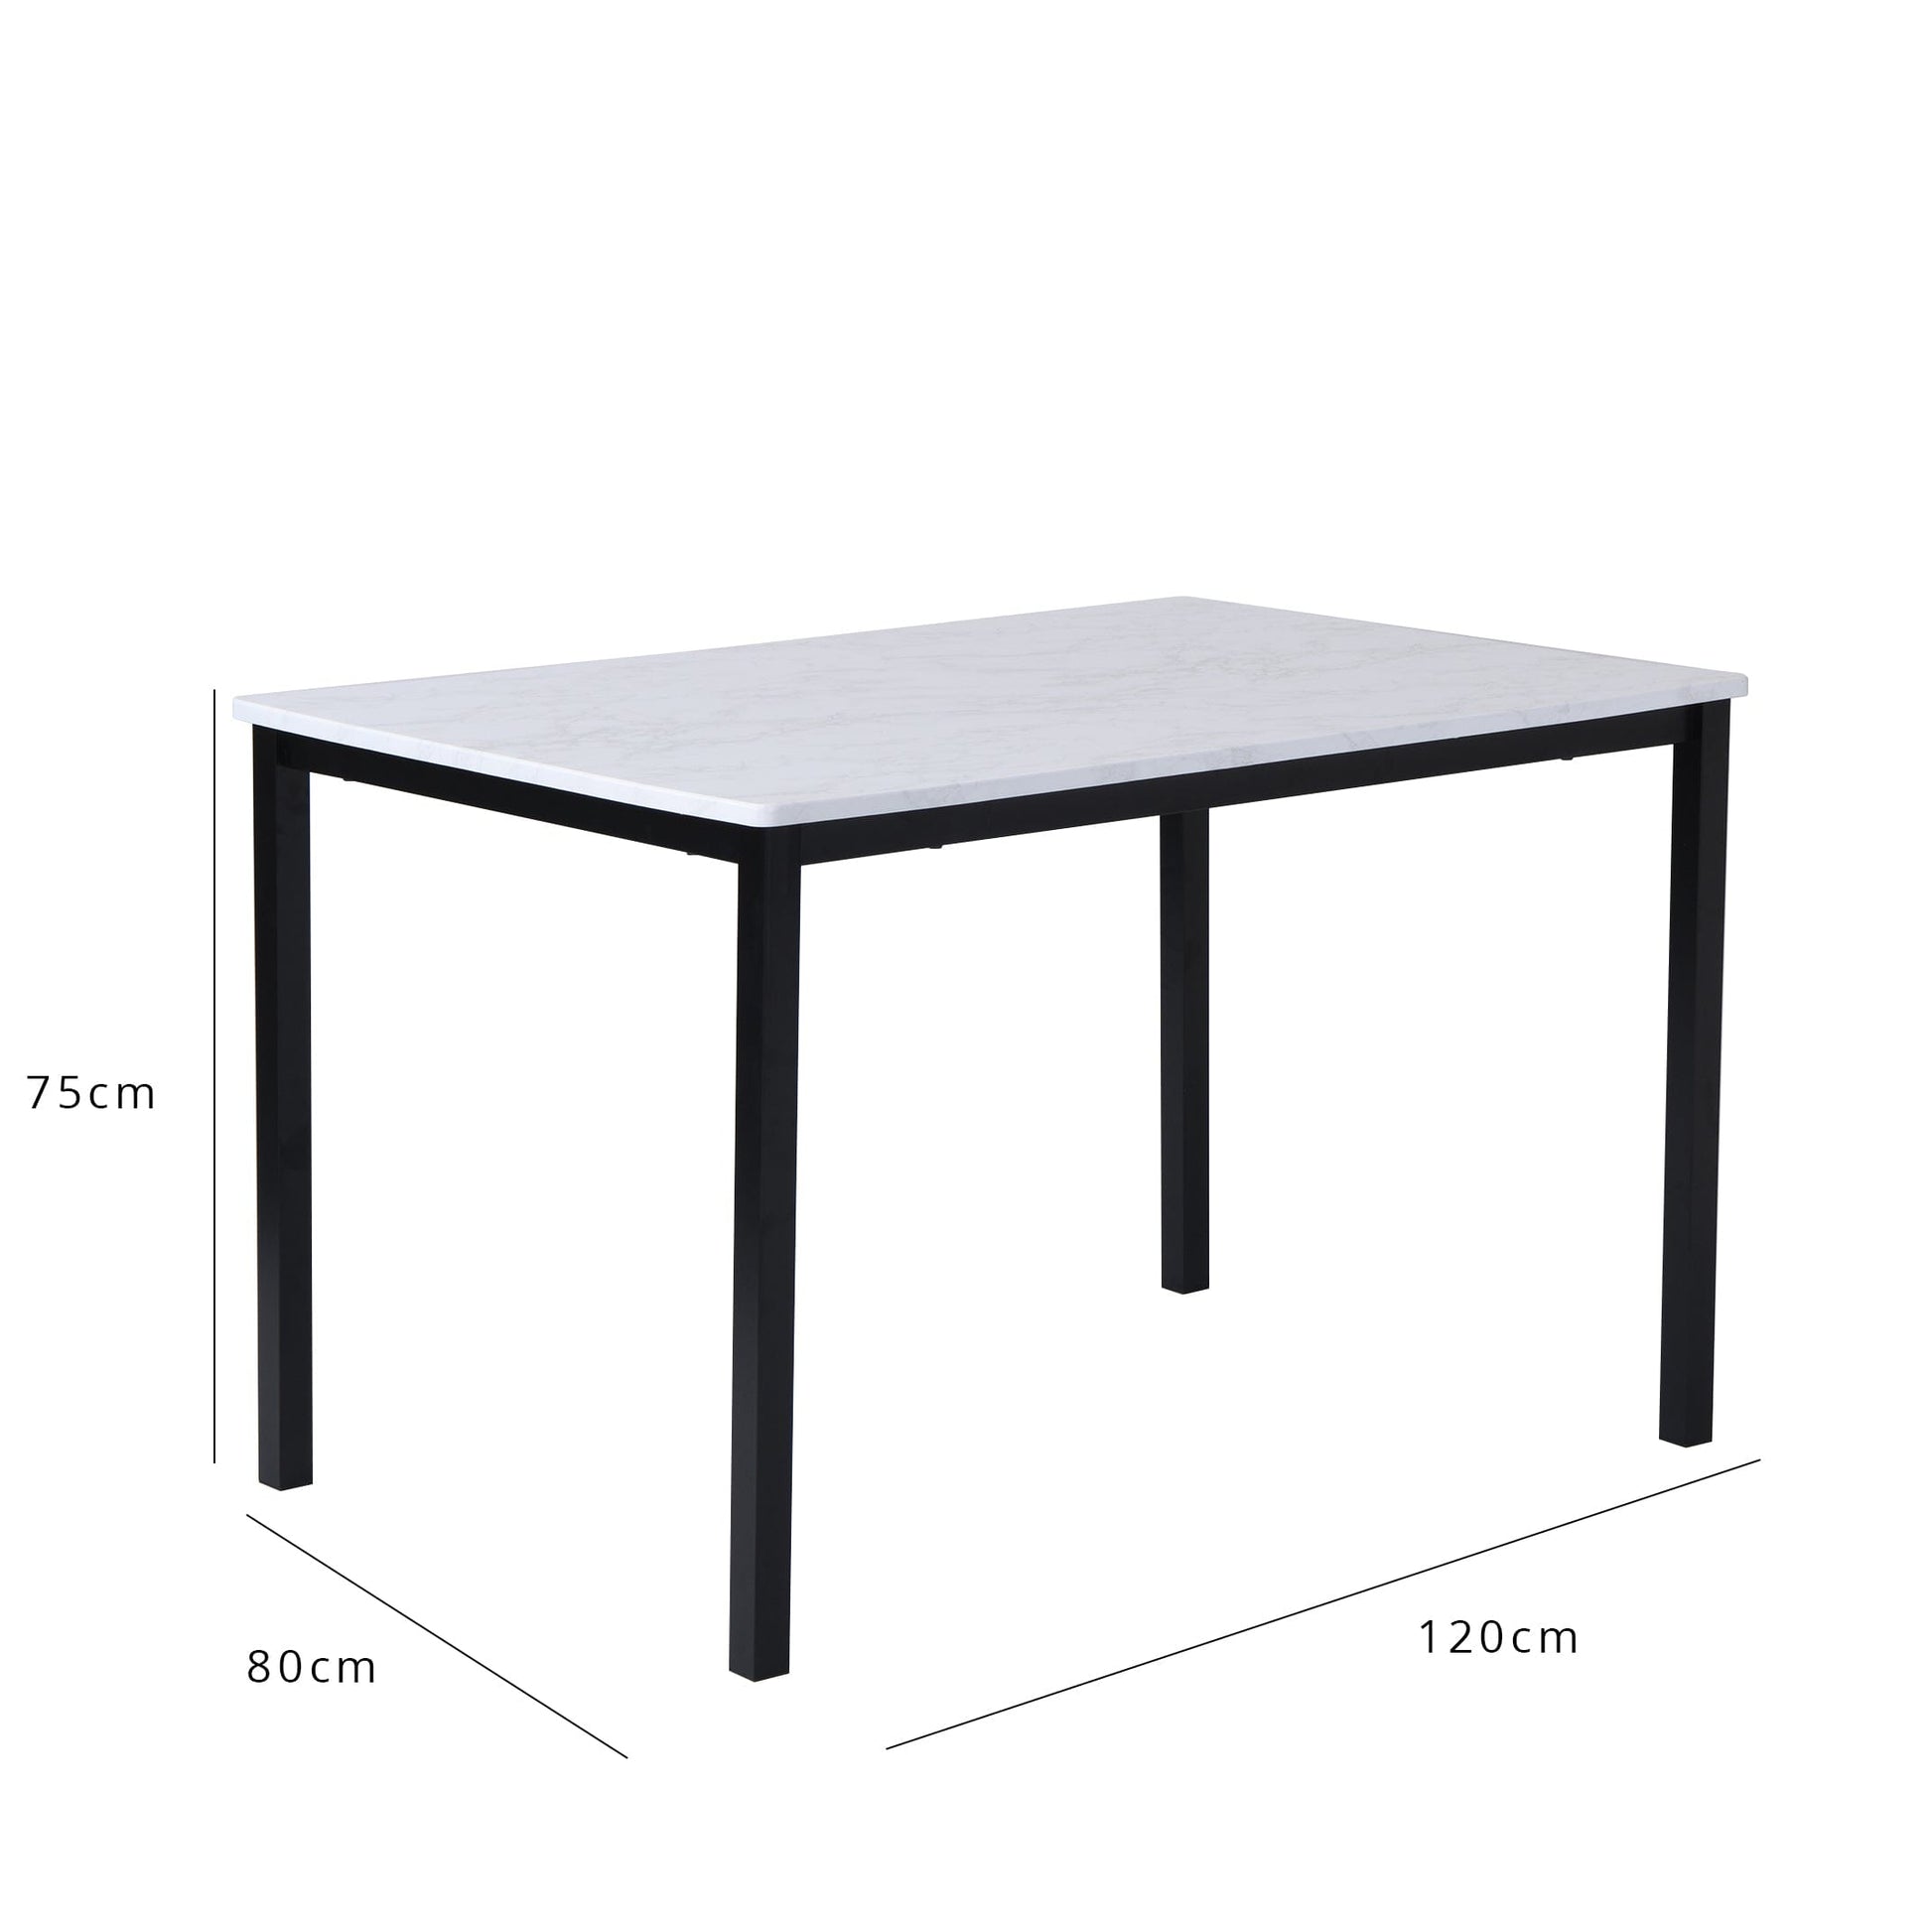 Milo Marble Table - 4 seater -  Ellis Teal and Black Chairs